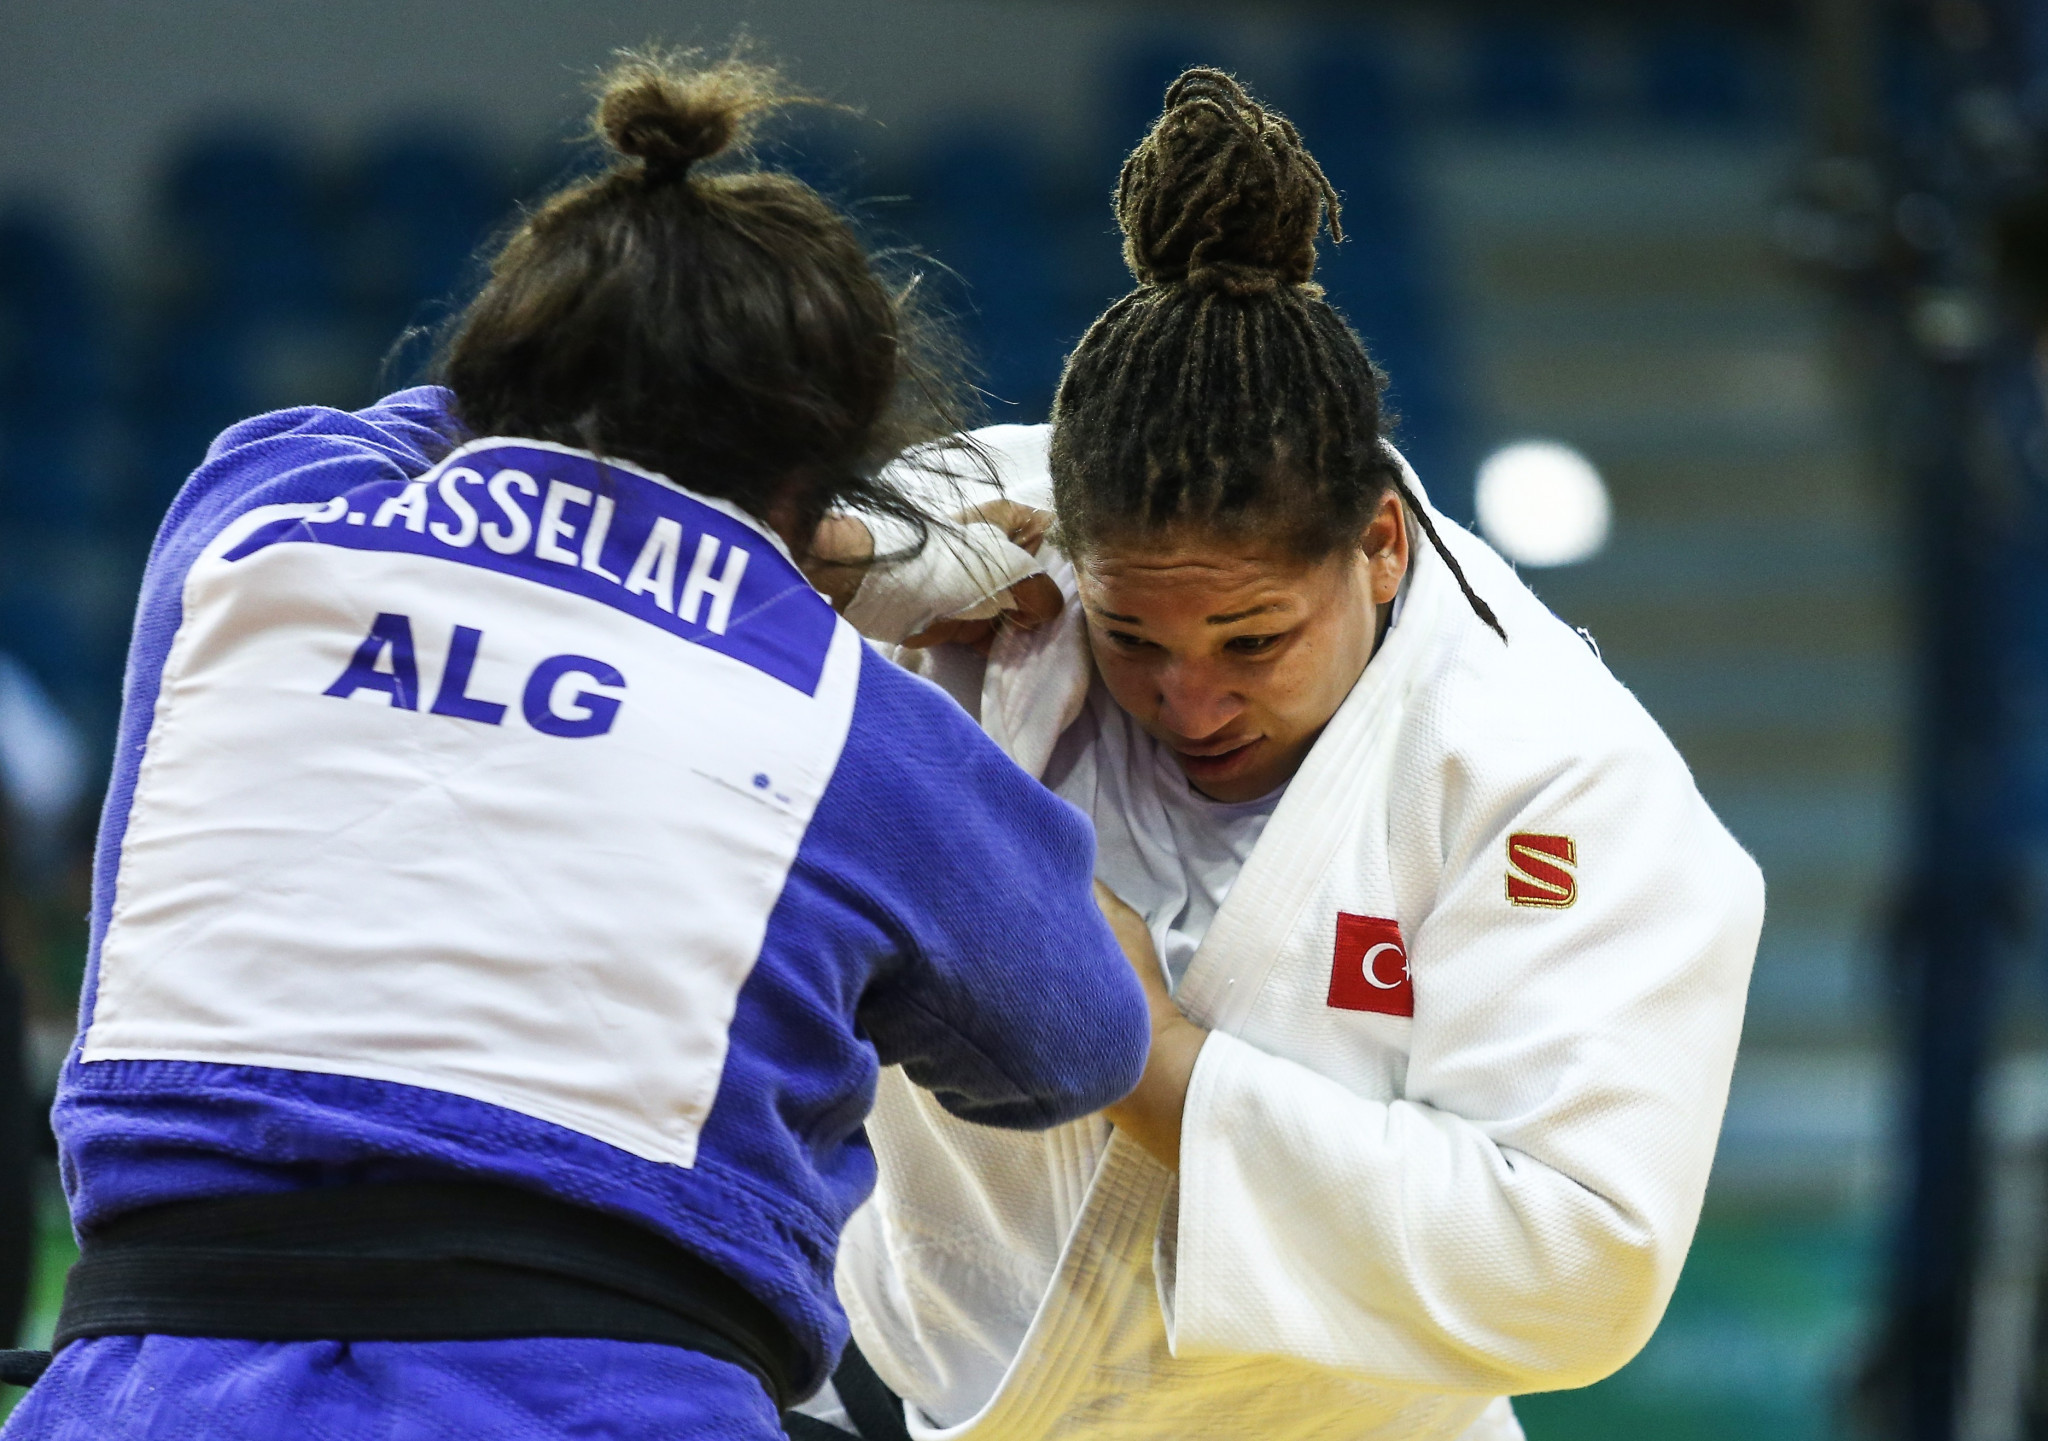 Turkey's Kayra Sayit retained the women’s over-78 kilogram title with victory over Algeria’s Sonia Asselah ©Konya 2021